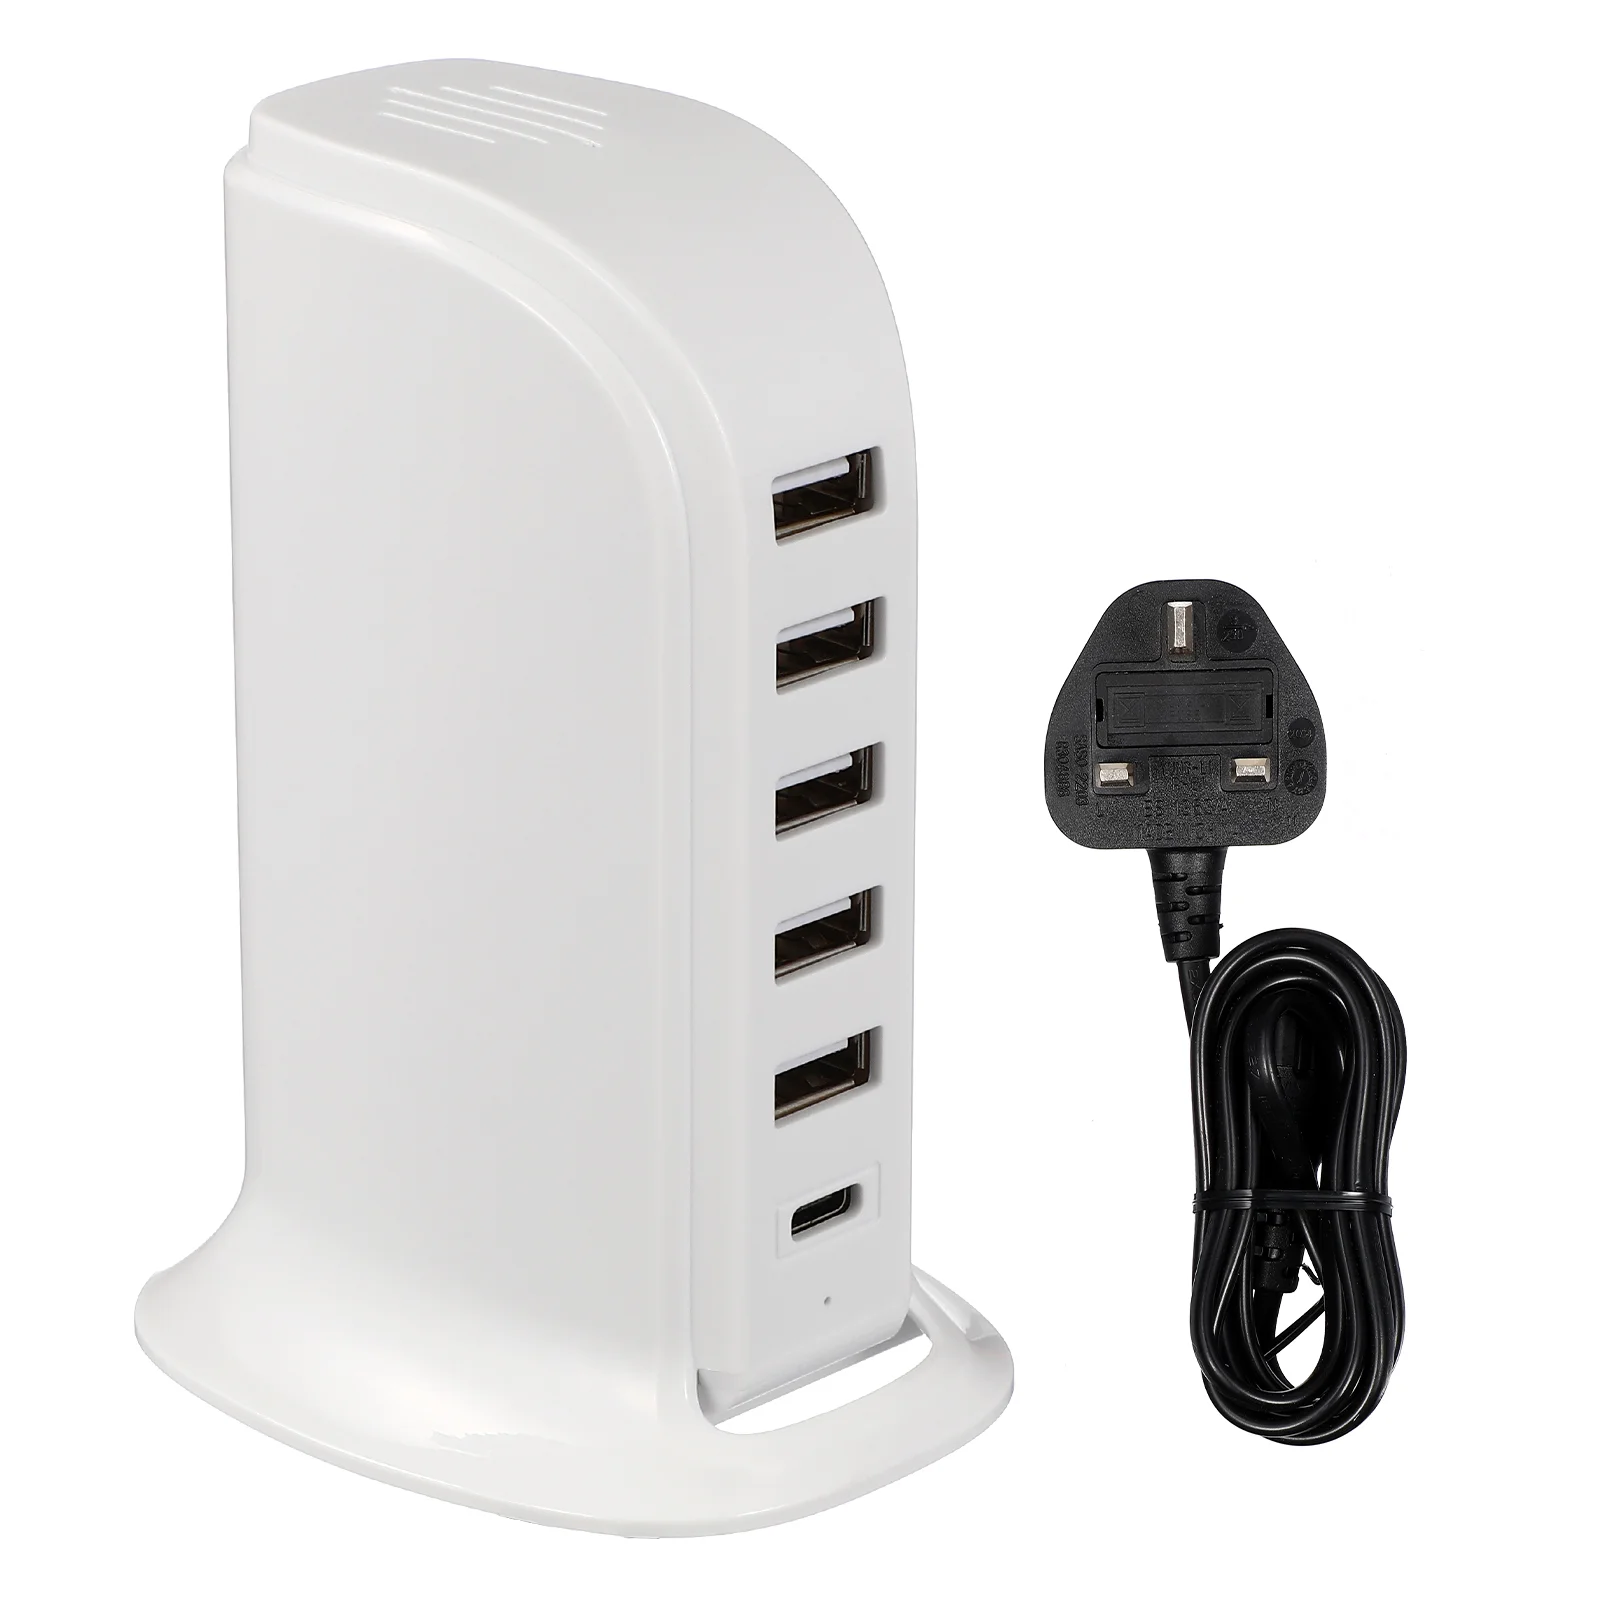 

20 W 20w USB Charging Tower For Multiple Devices Smart Outlet 6 Station Chargers Port Abs 40w Plug